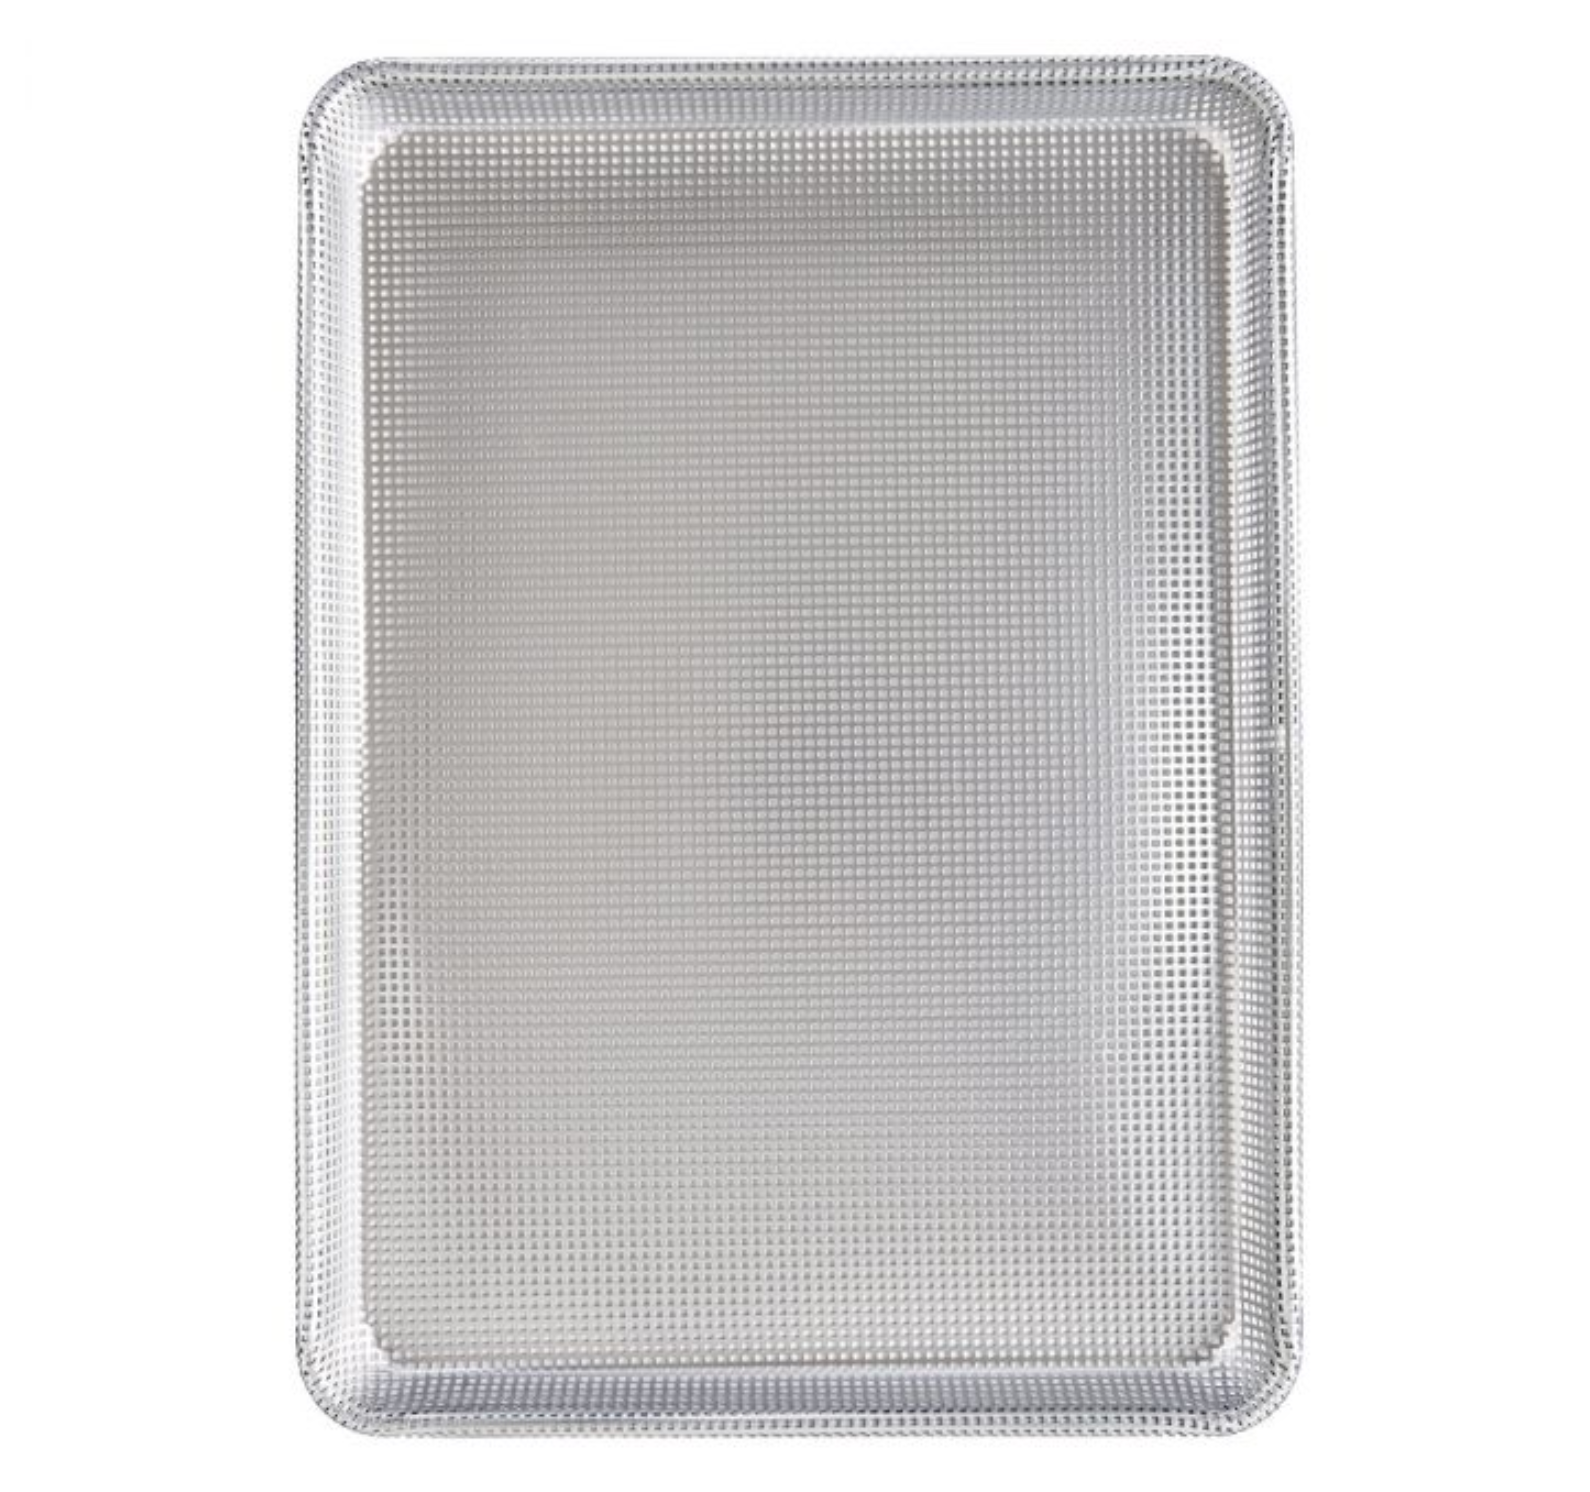 Anderson's Baking Non-Stick Perforated Crisping Pan – 13" x 18"